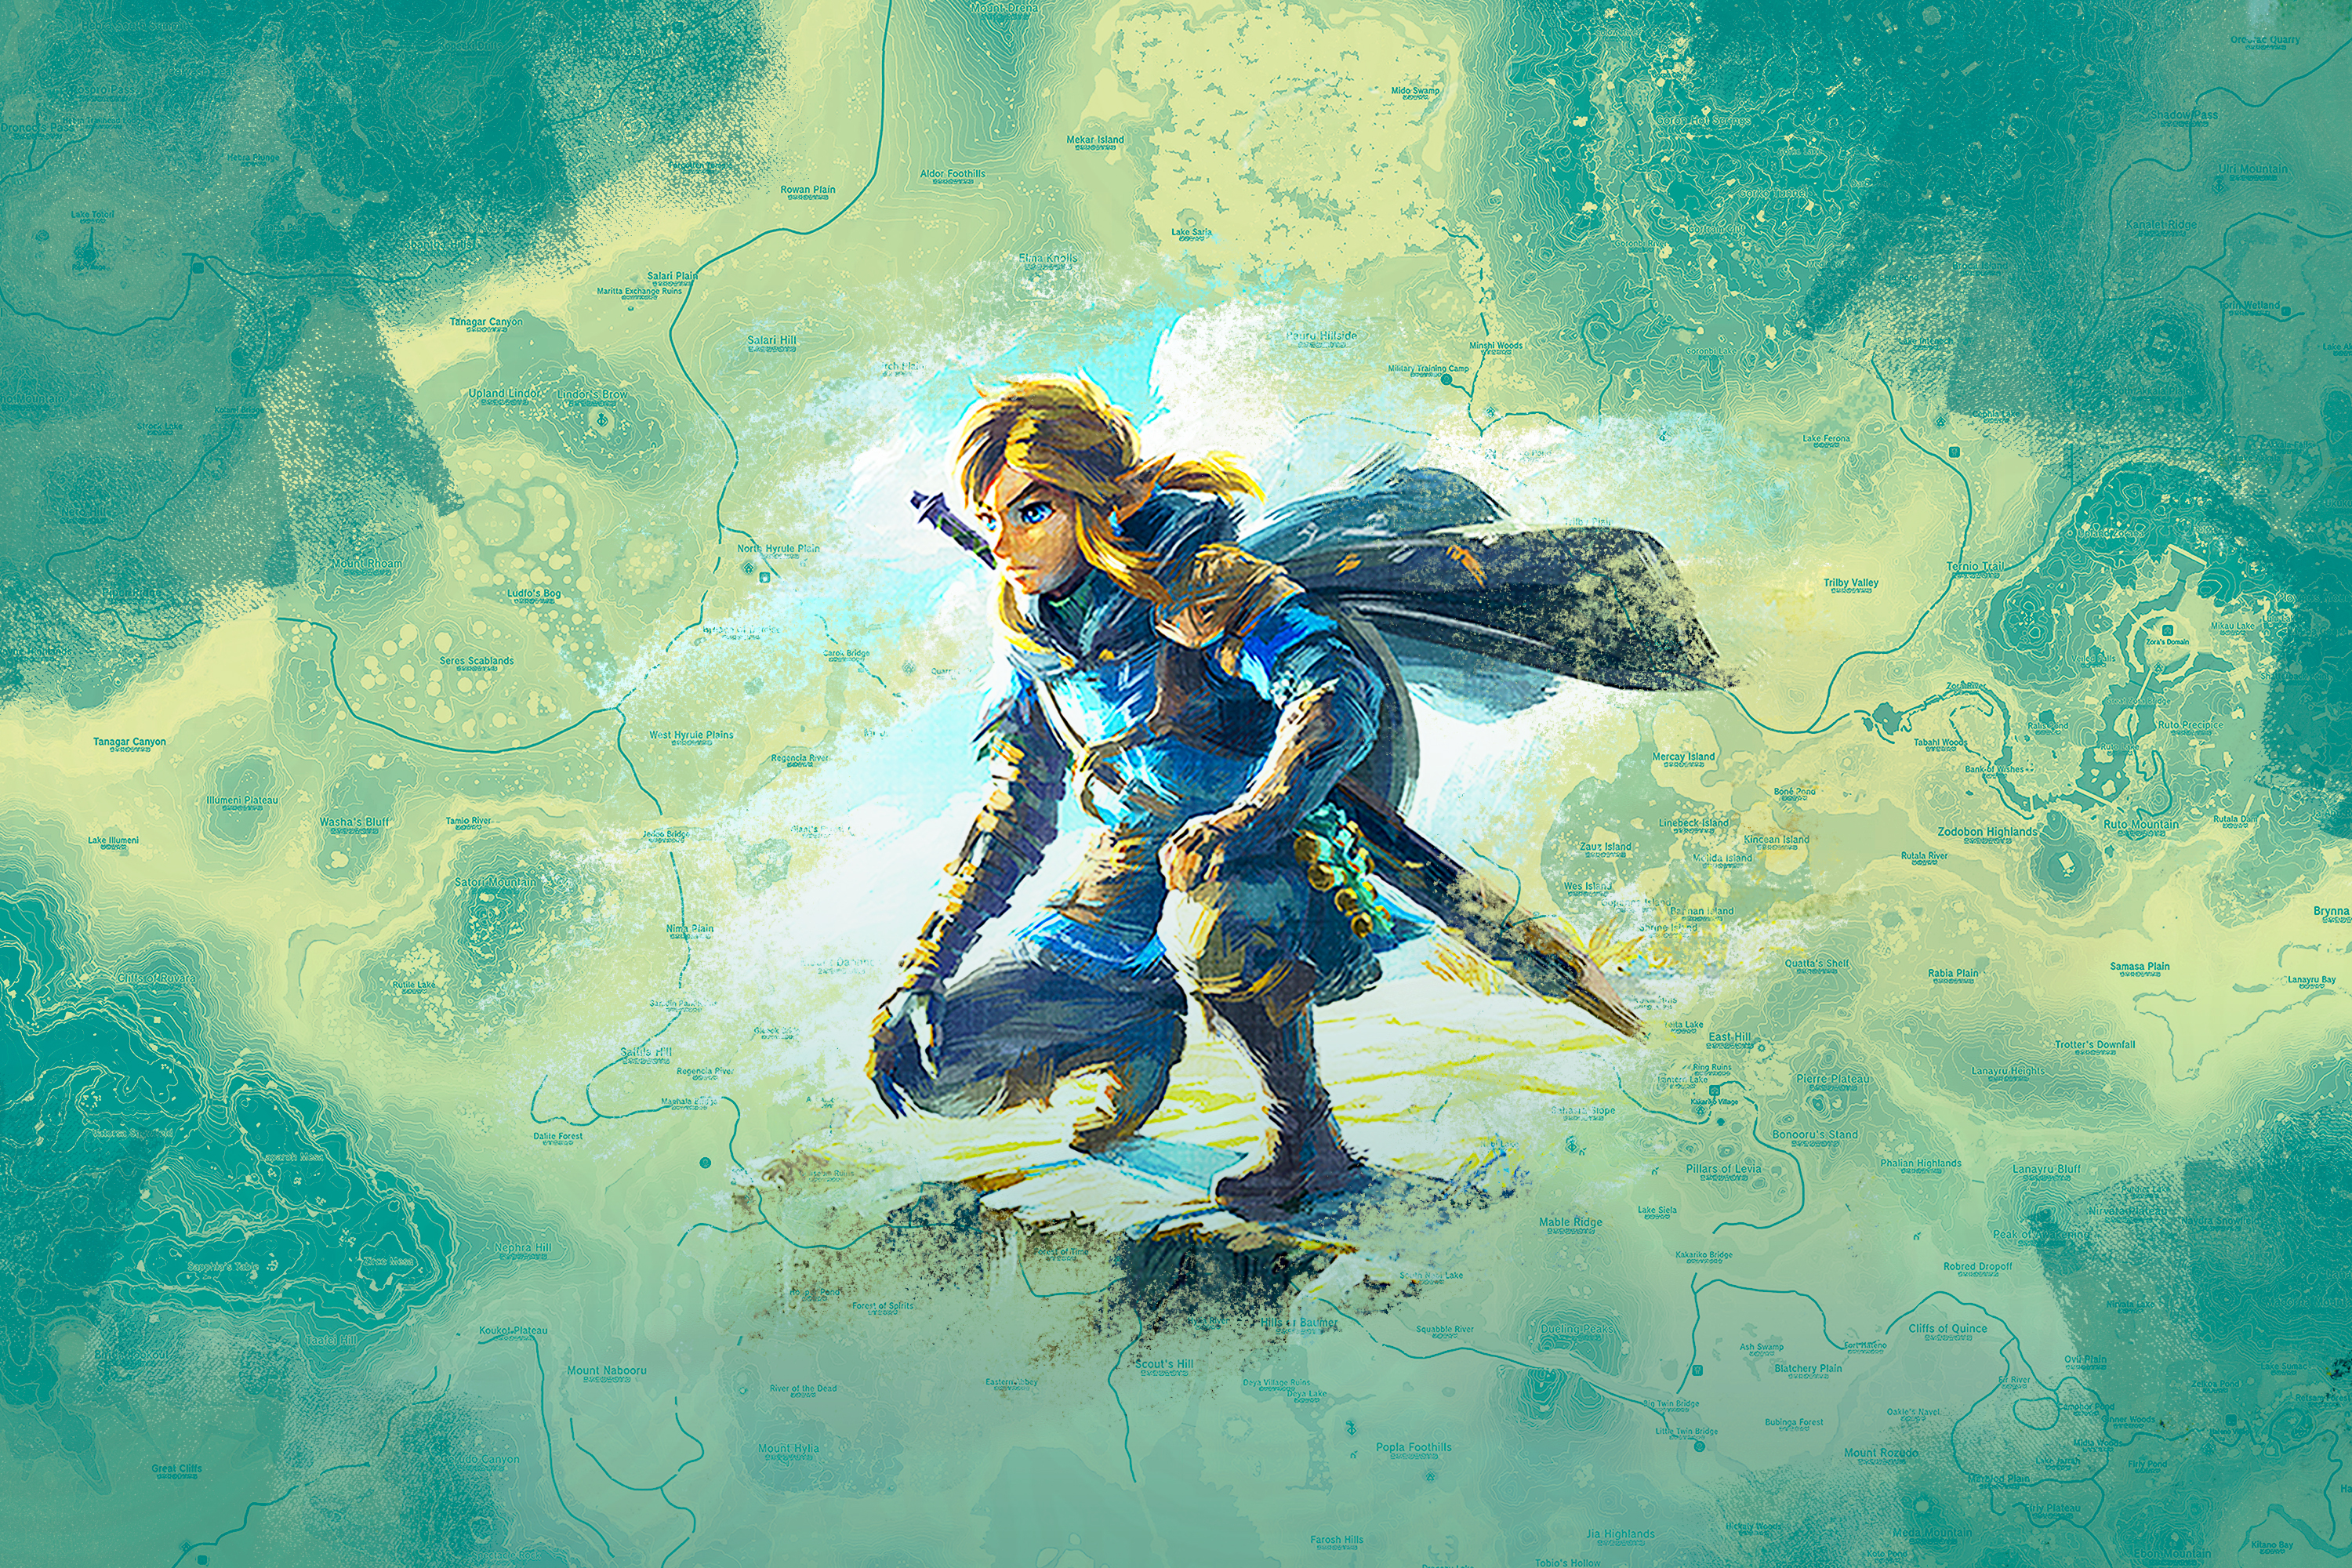 Link crouches down while wearing a blue tunic in key art for Zelda Tears of the Kingdom.